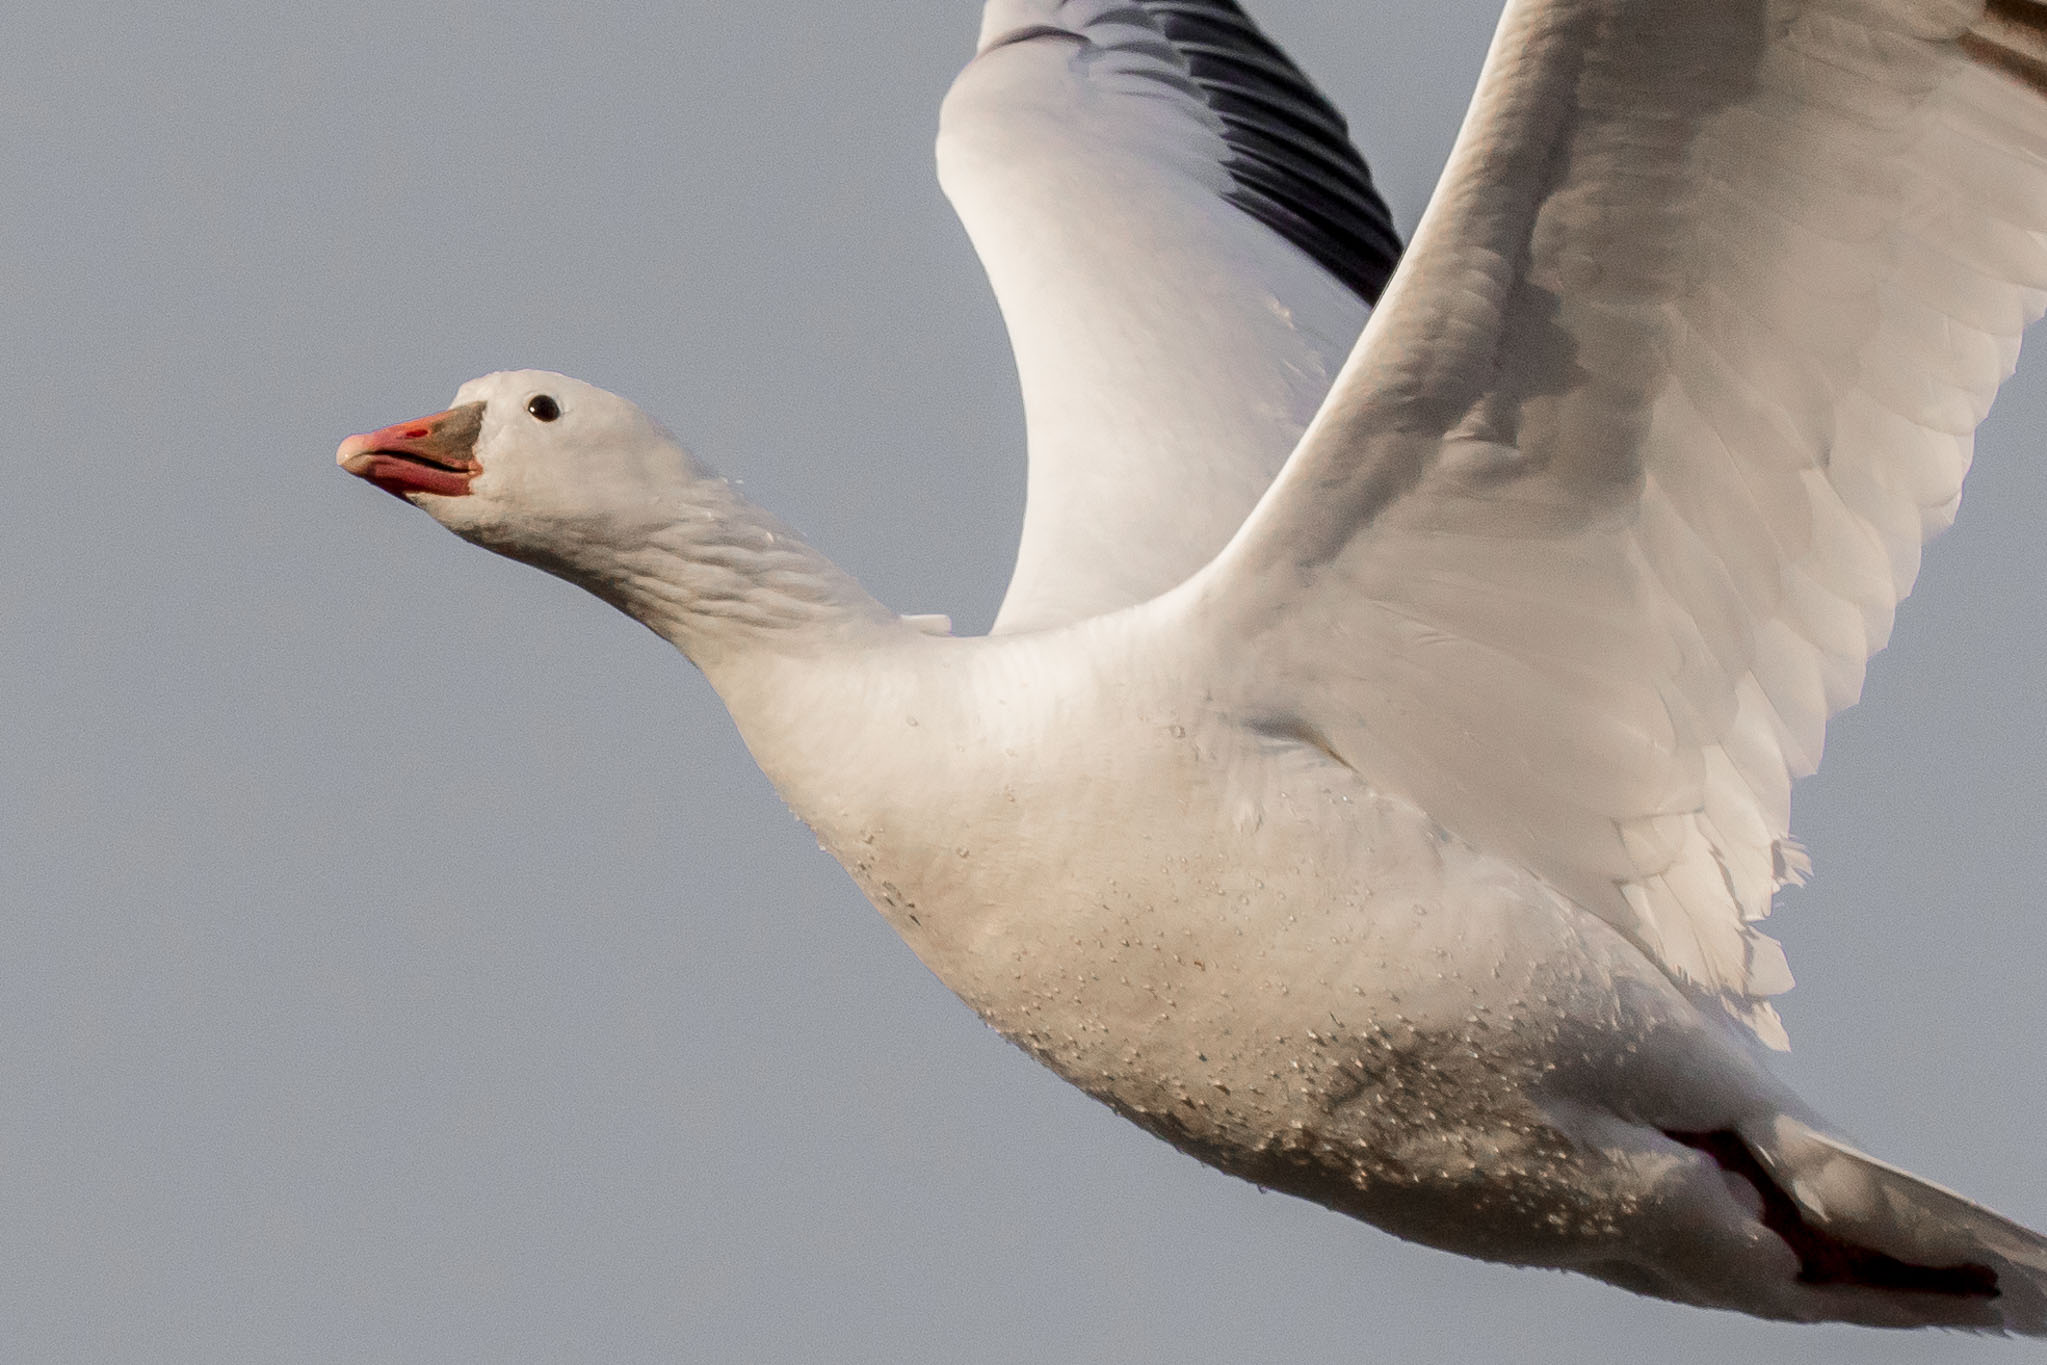 Ross's Goose flying from roost, Bosque del Apache National Wildlife Refuge, San Antonio NM, December 20, 2014